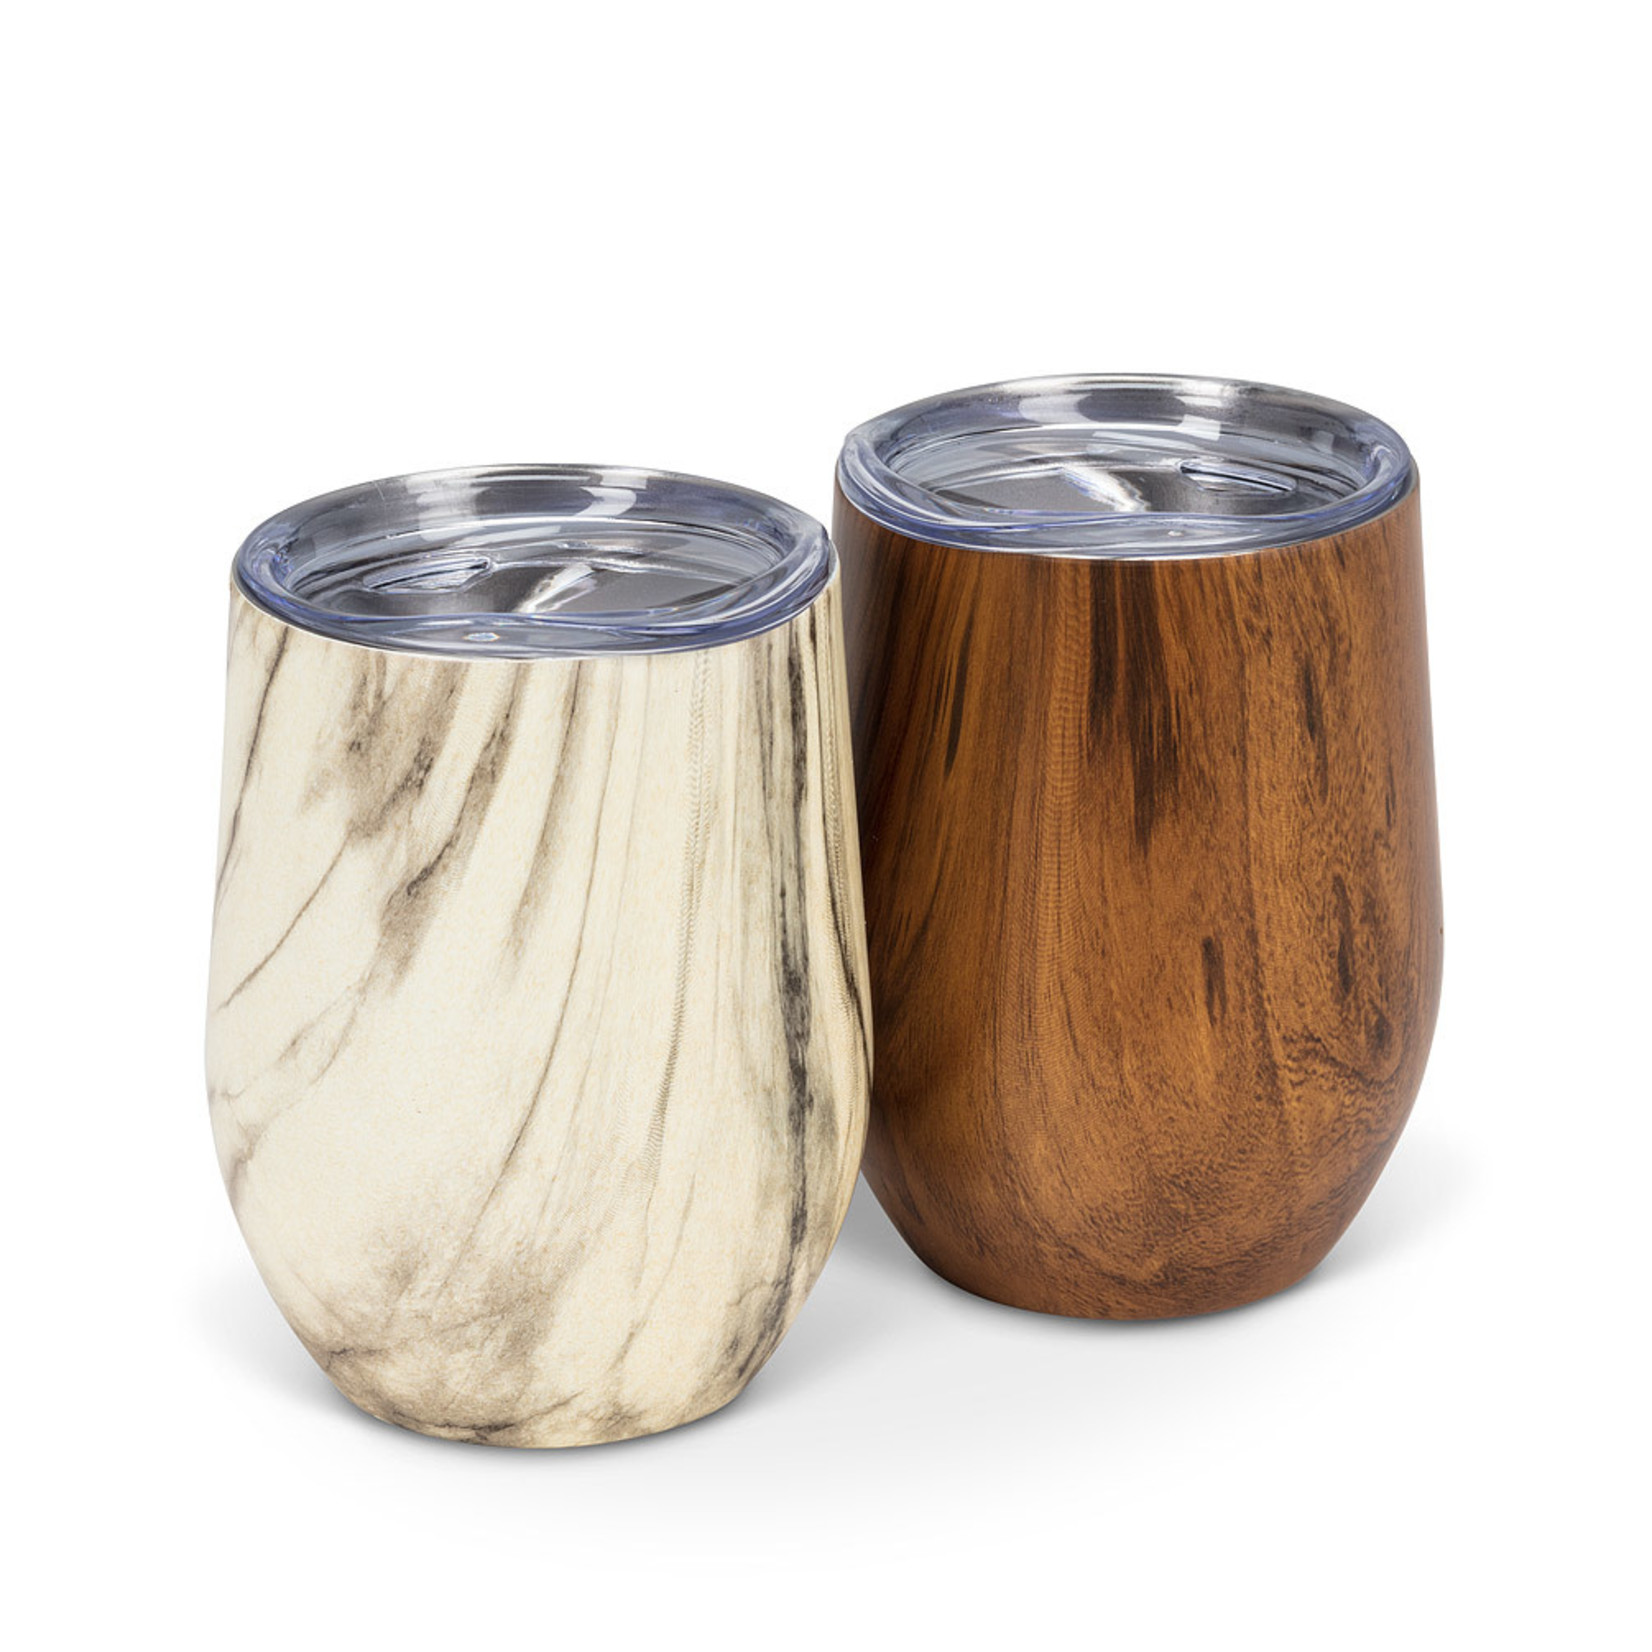 Insulated Cup - Marble